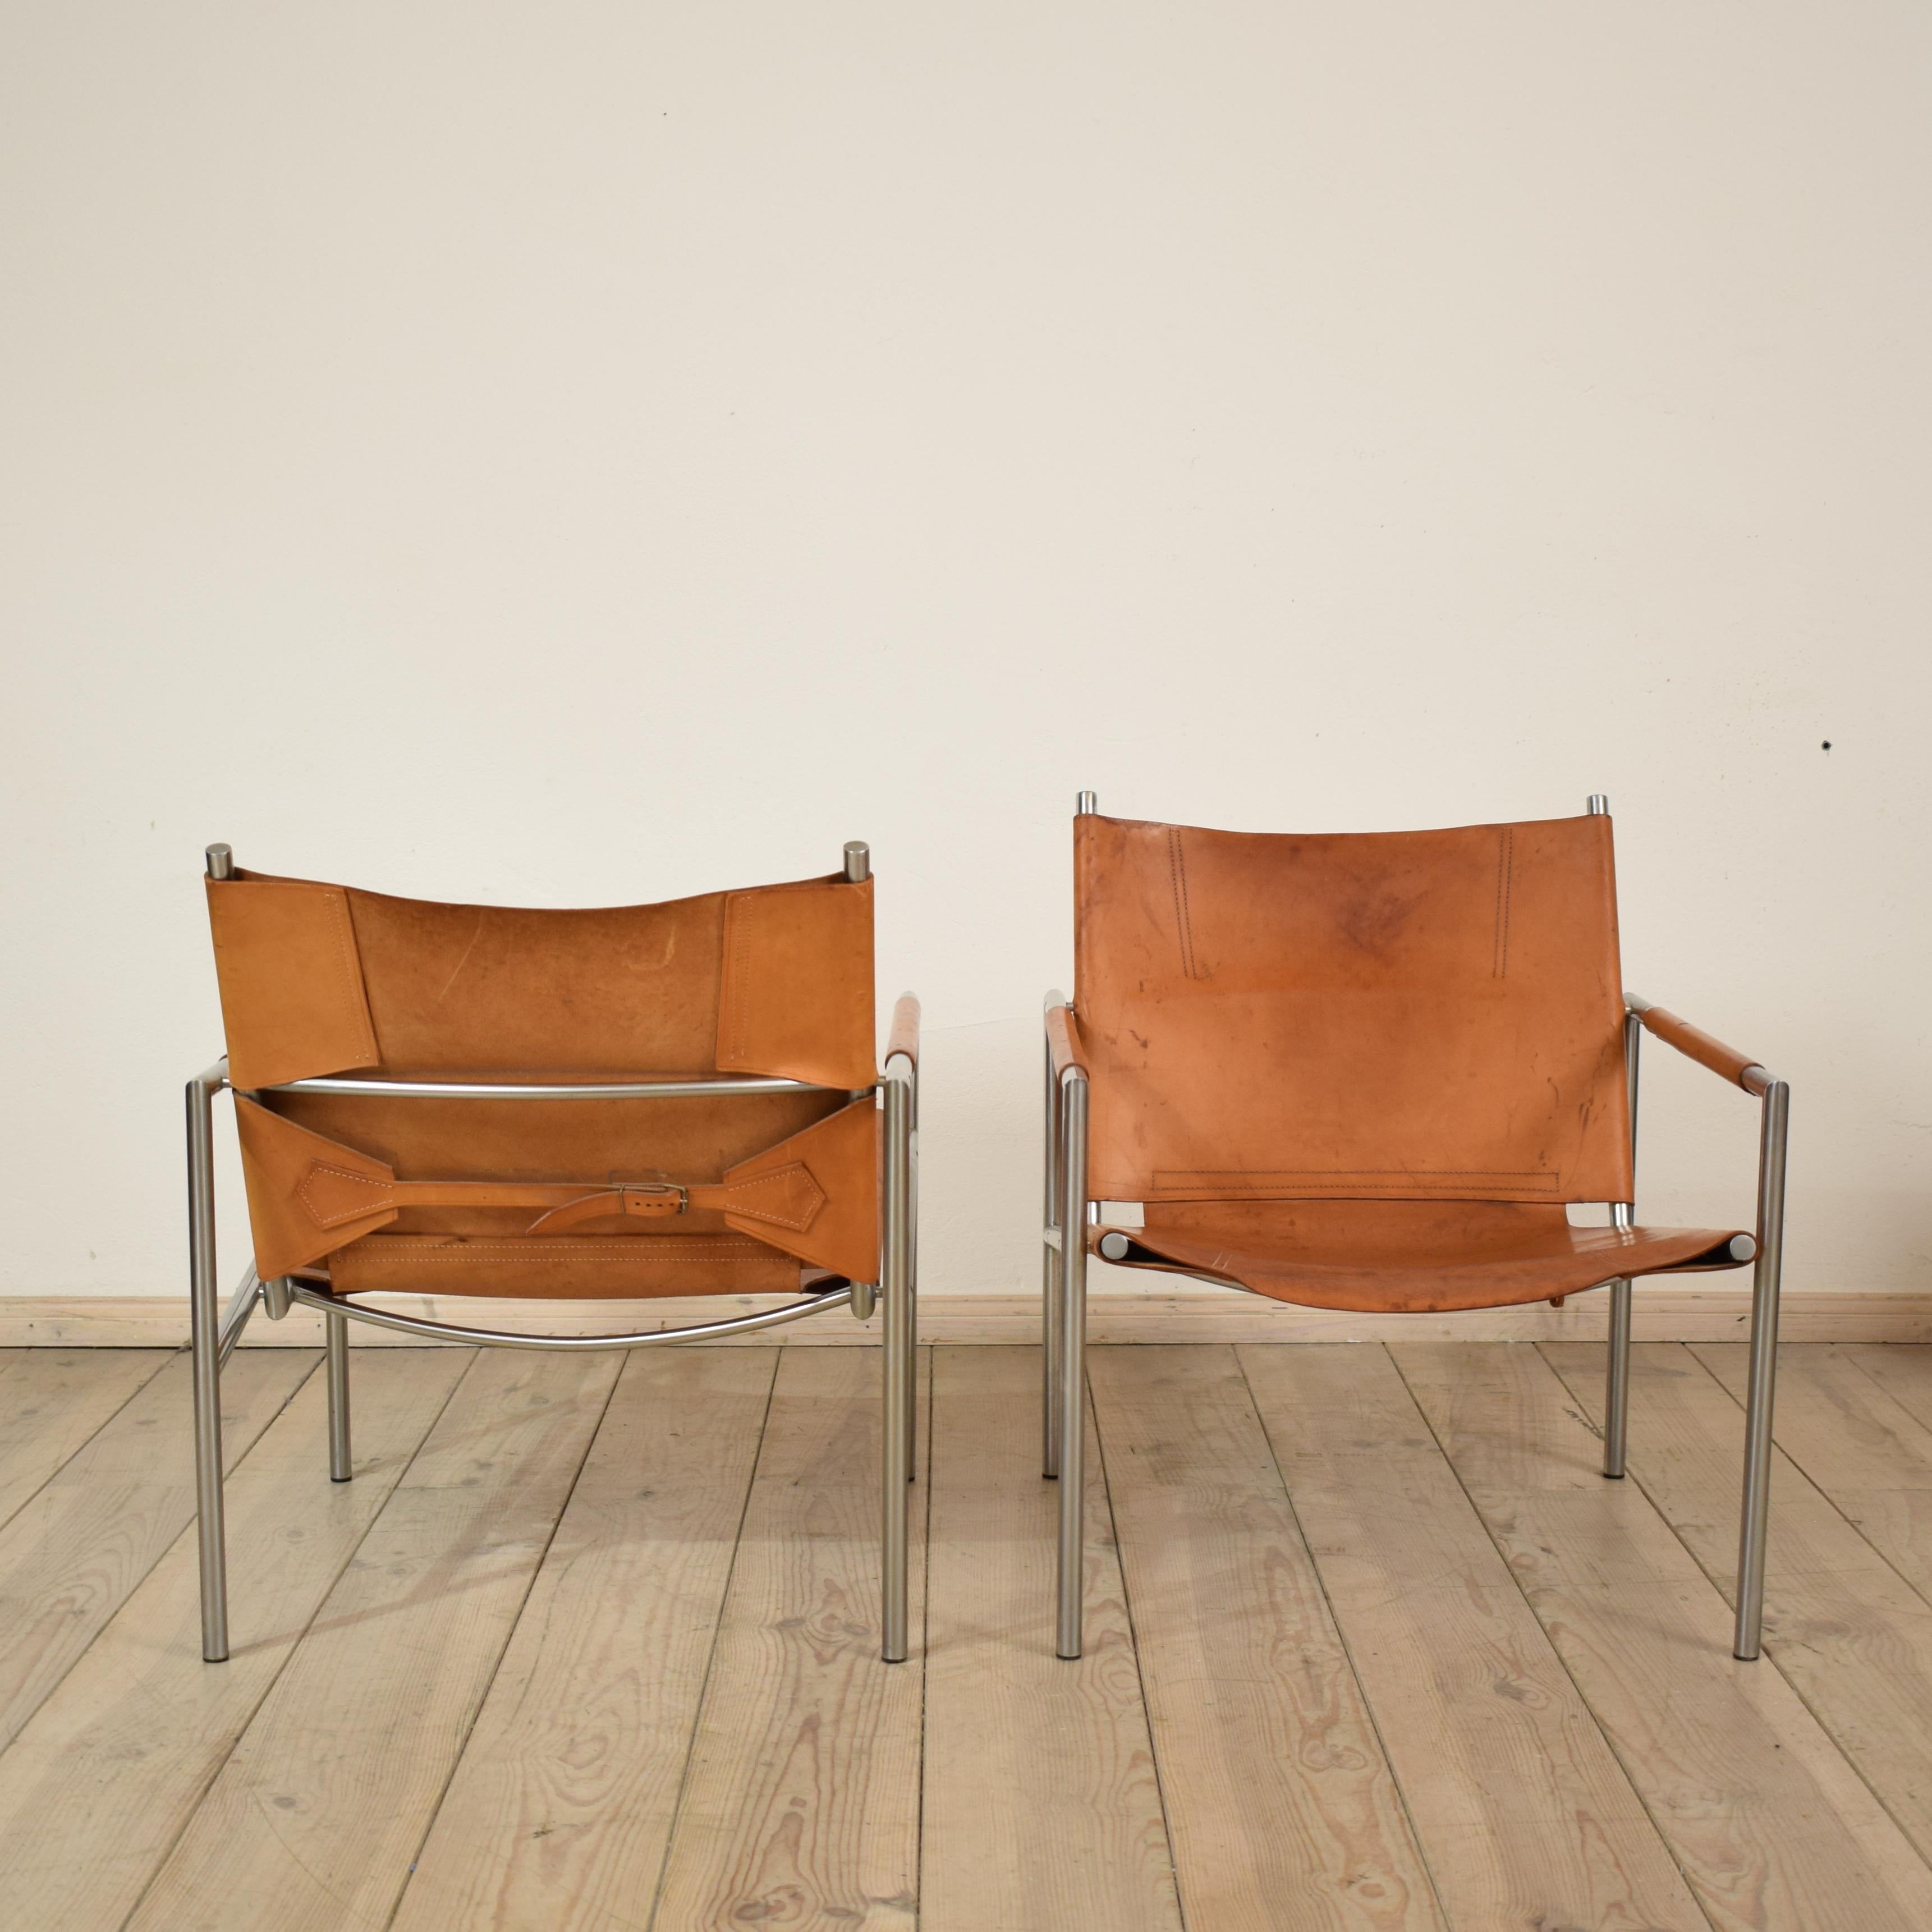 Patinated Pair of Lounge Chairs by Martin Visser, Model 'SZ02' for 't Spectrum Bergeijk